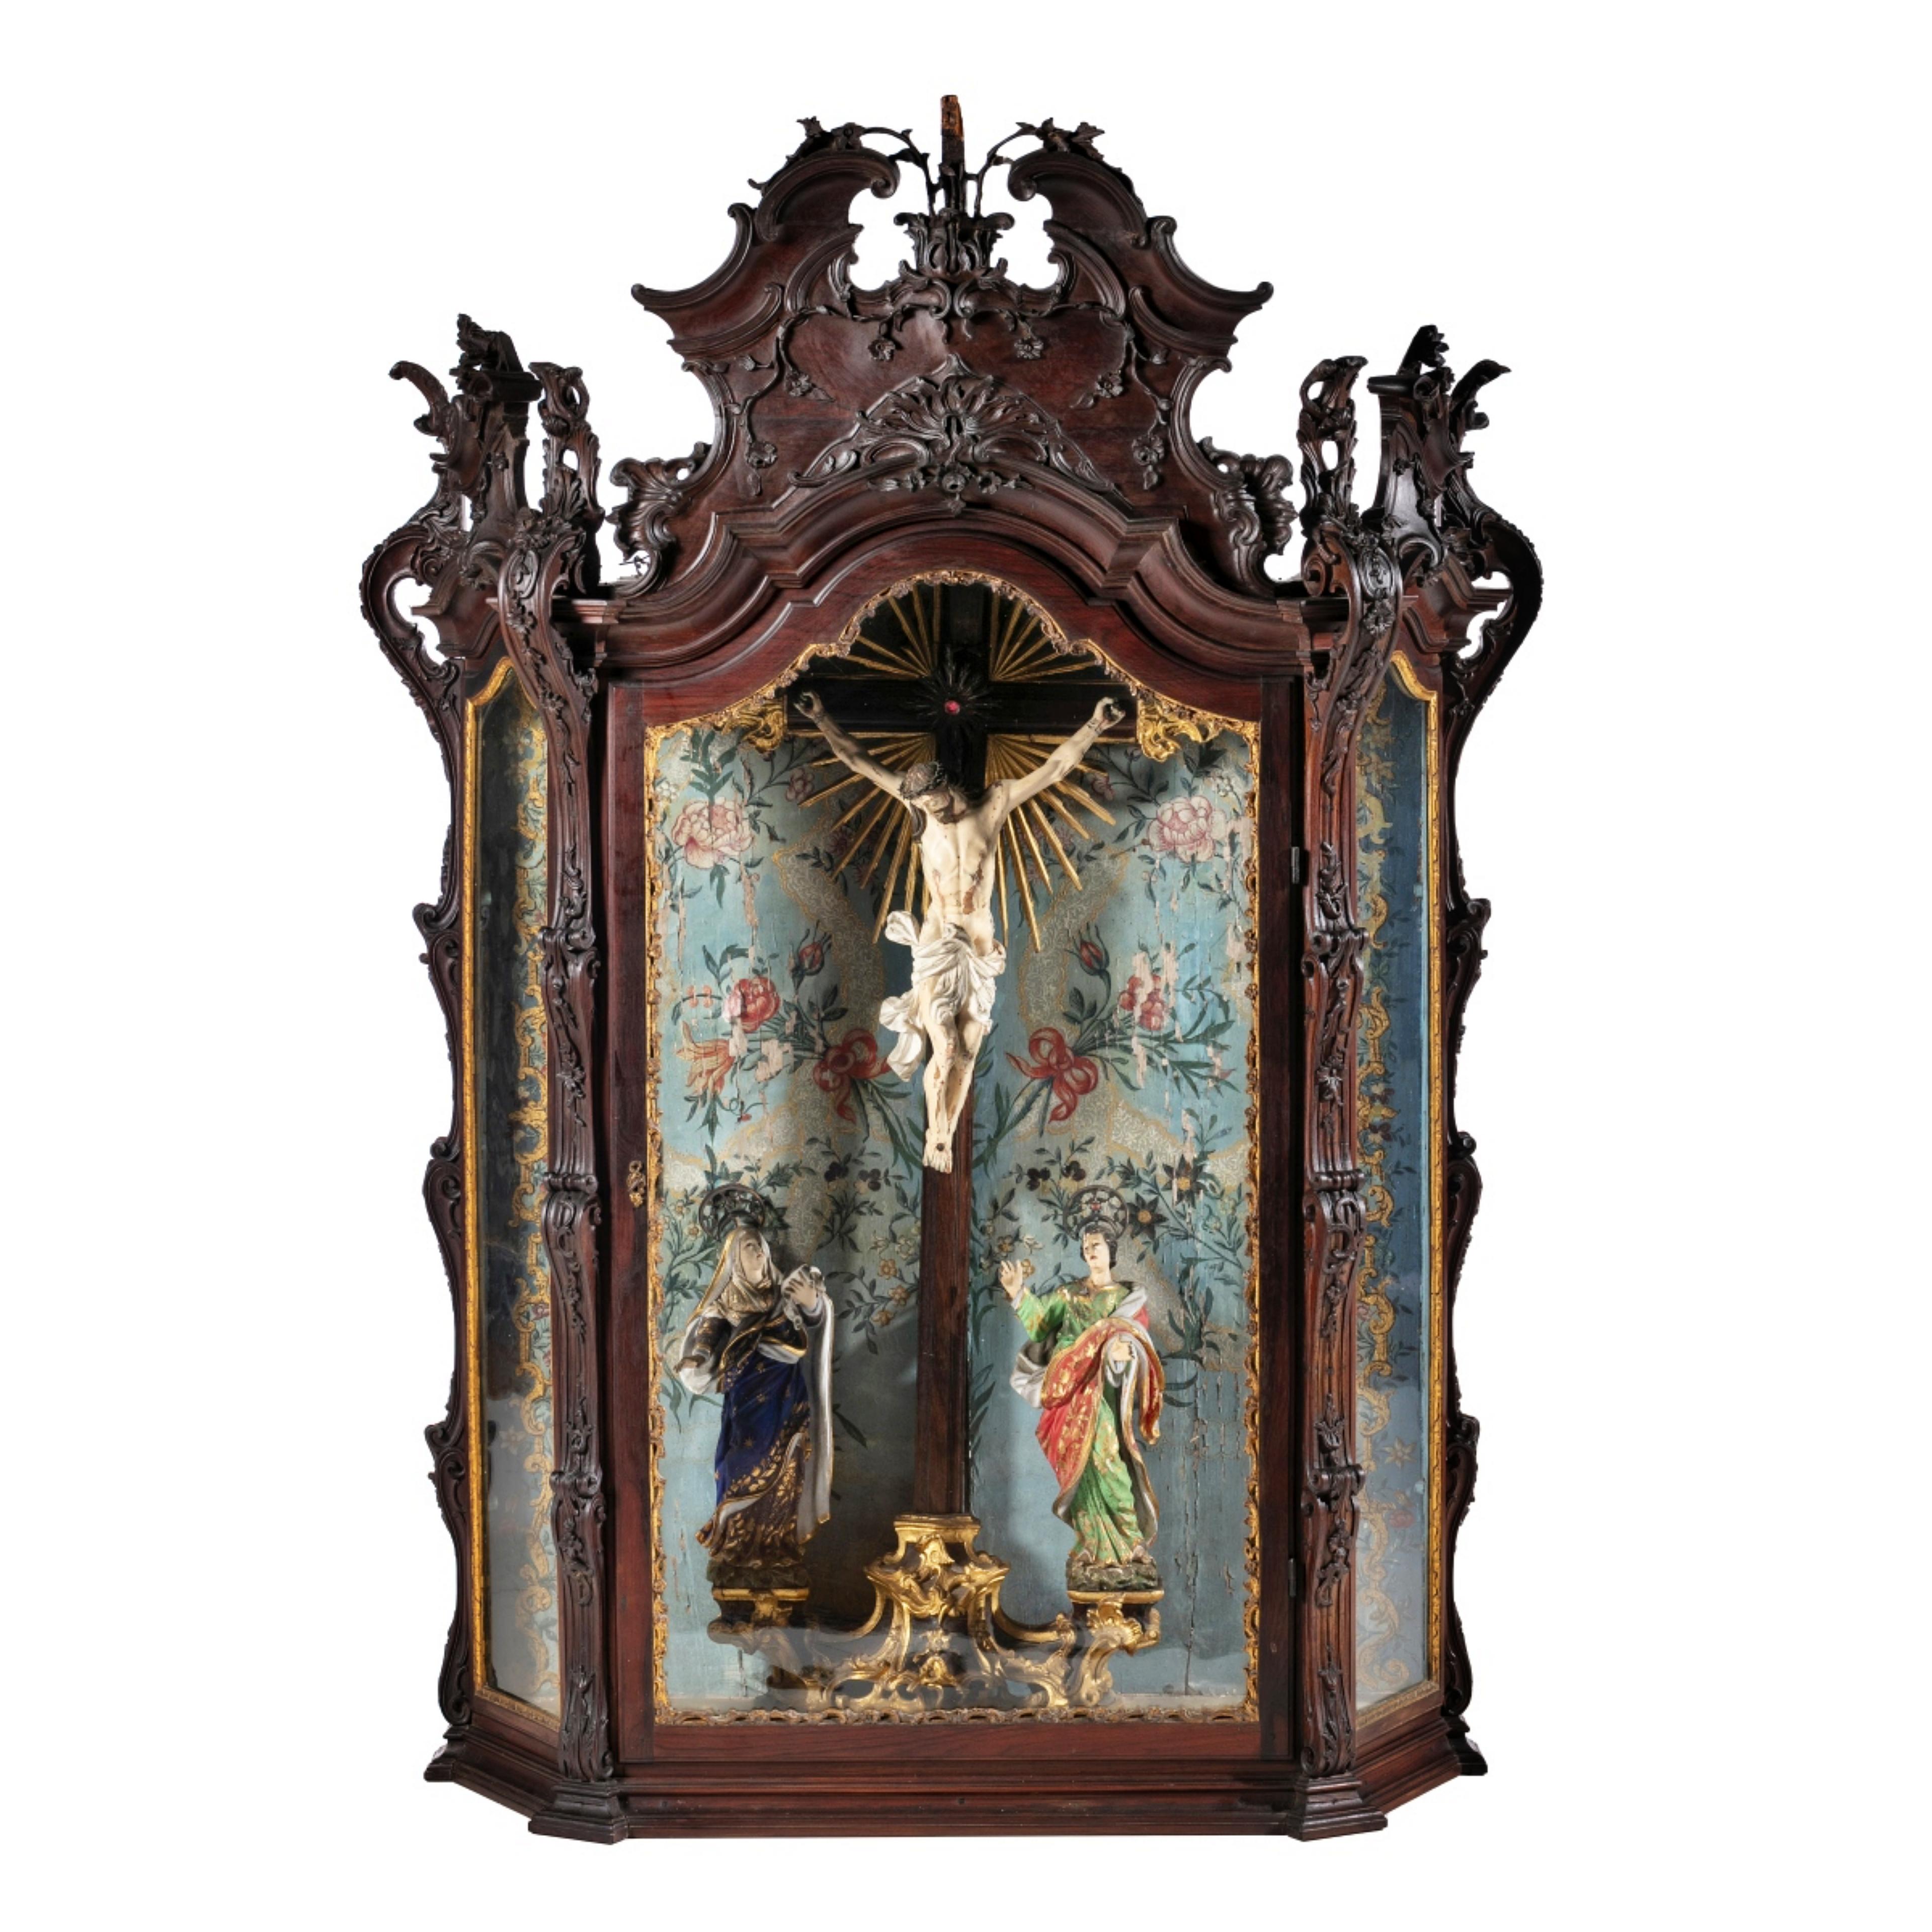 Hand-Crafted IMPORTANT PORTUGUESE ORATORY WITH CALVARY 18th Century For Sale